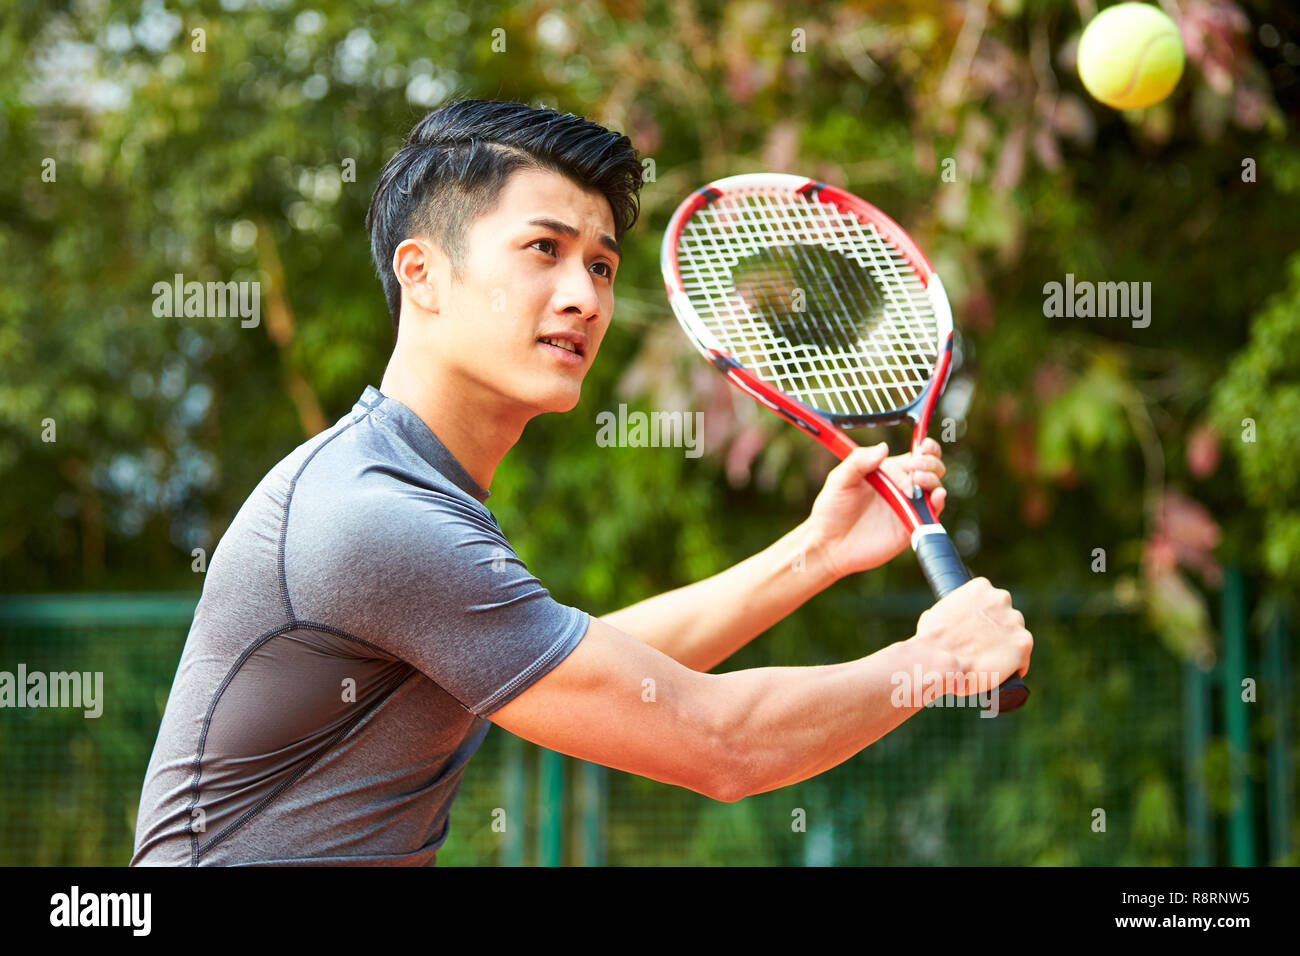 Young Asian male tennis player hitting ball avec un revers Banque D'Images